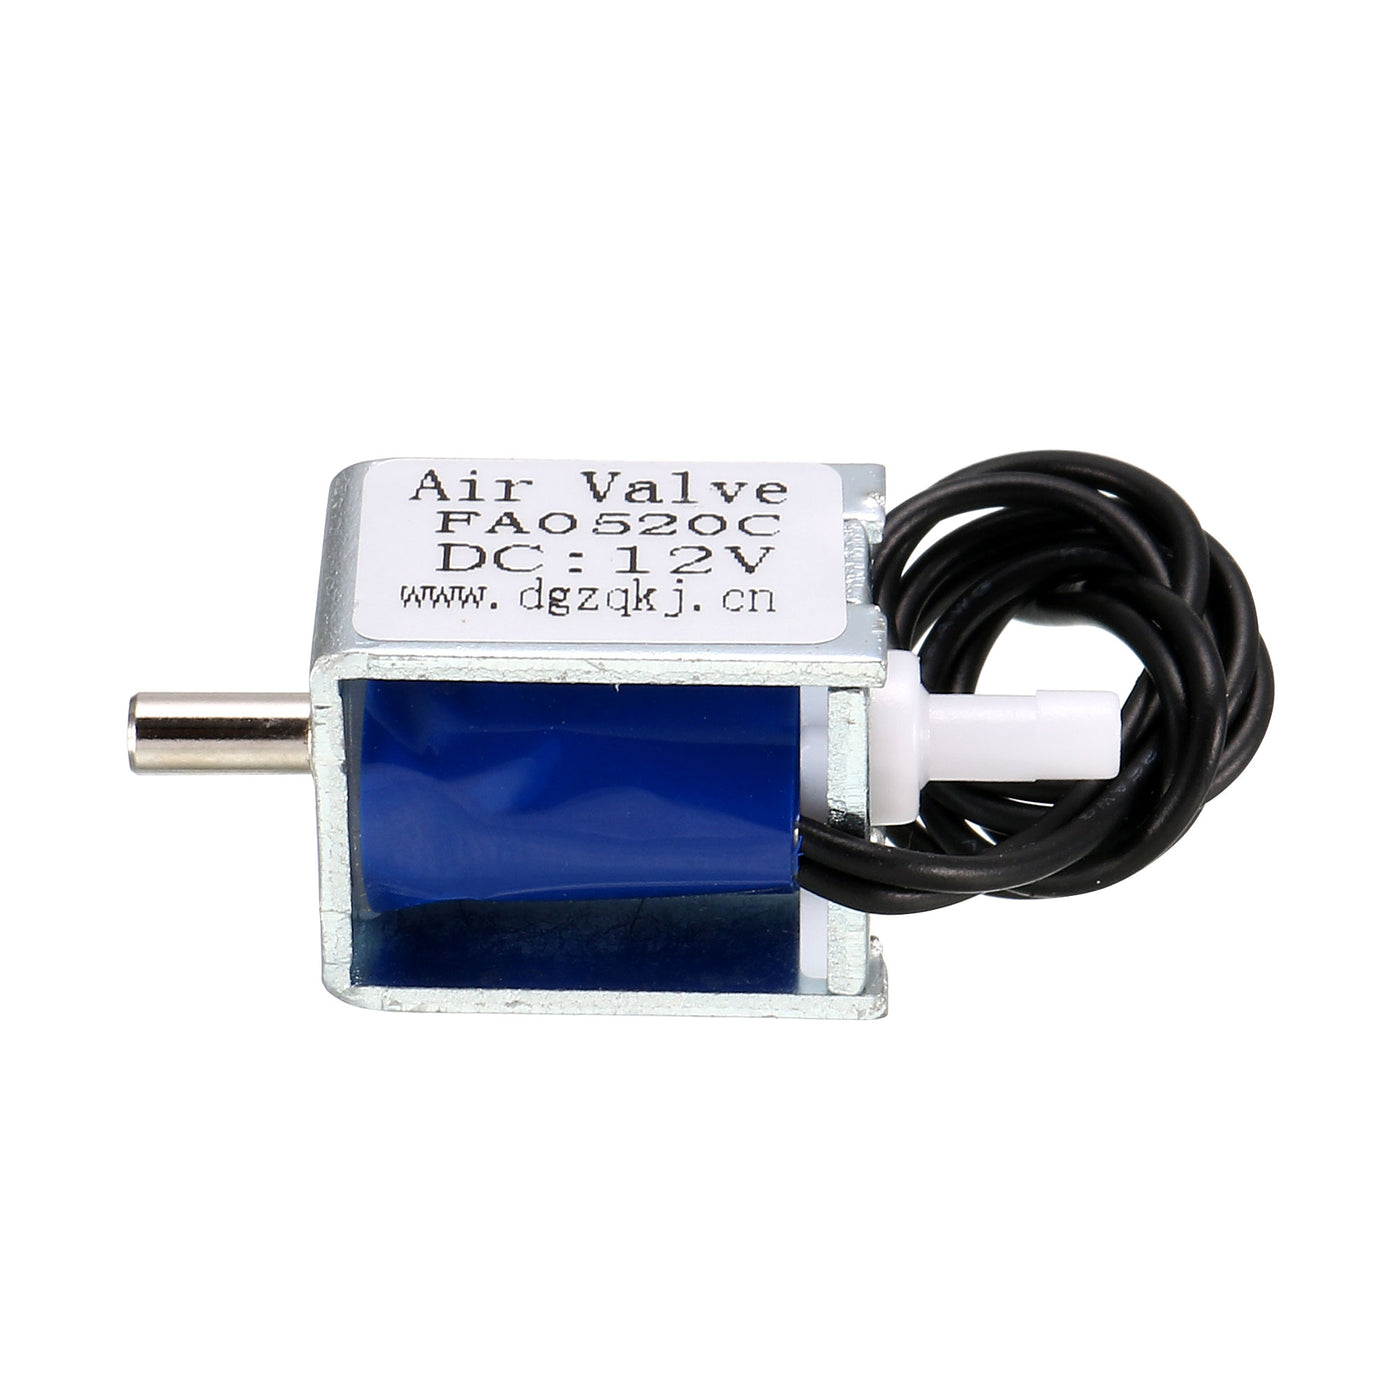 uxcell Uxcell Miniature Solenoid Valve 2 Way Normally Opened DC12V 45mA Air Solenoid Valve, 2pcs